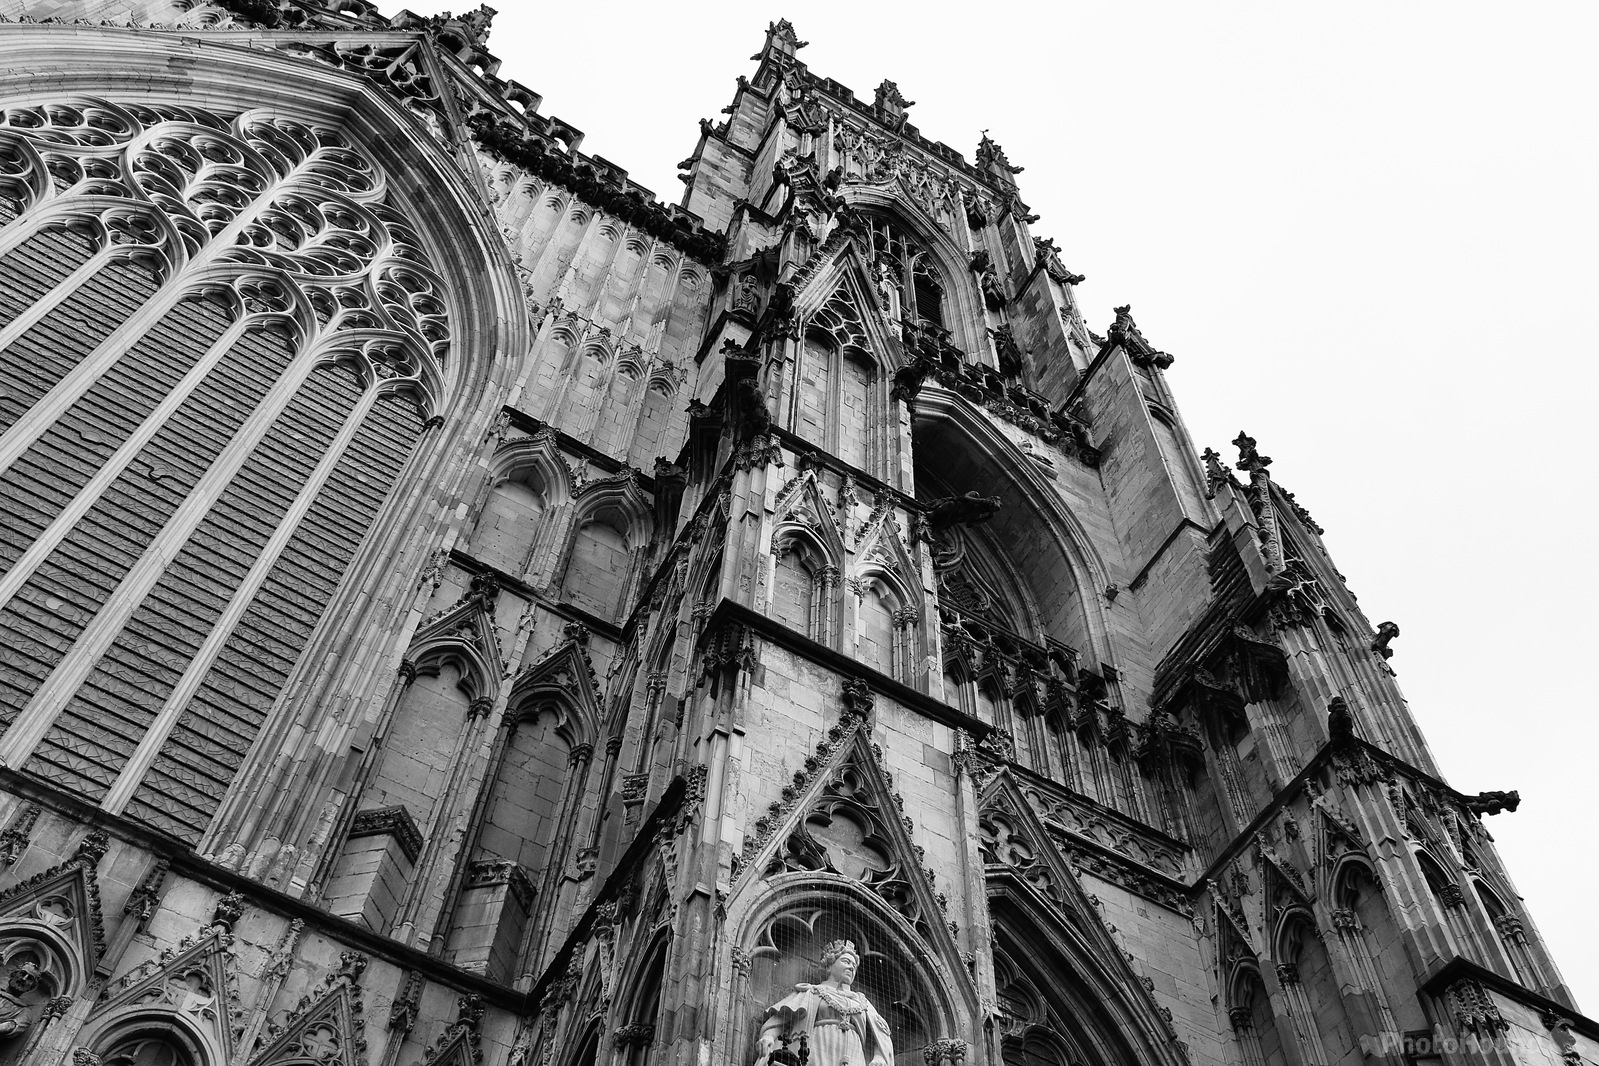 Image of York Minster by Florence Allanson